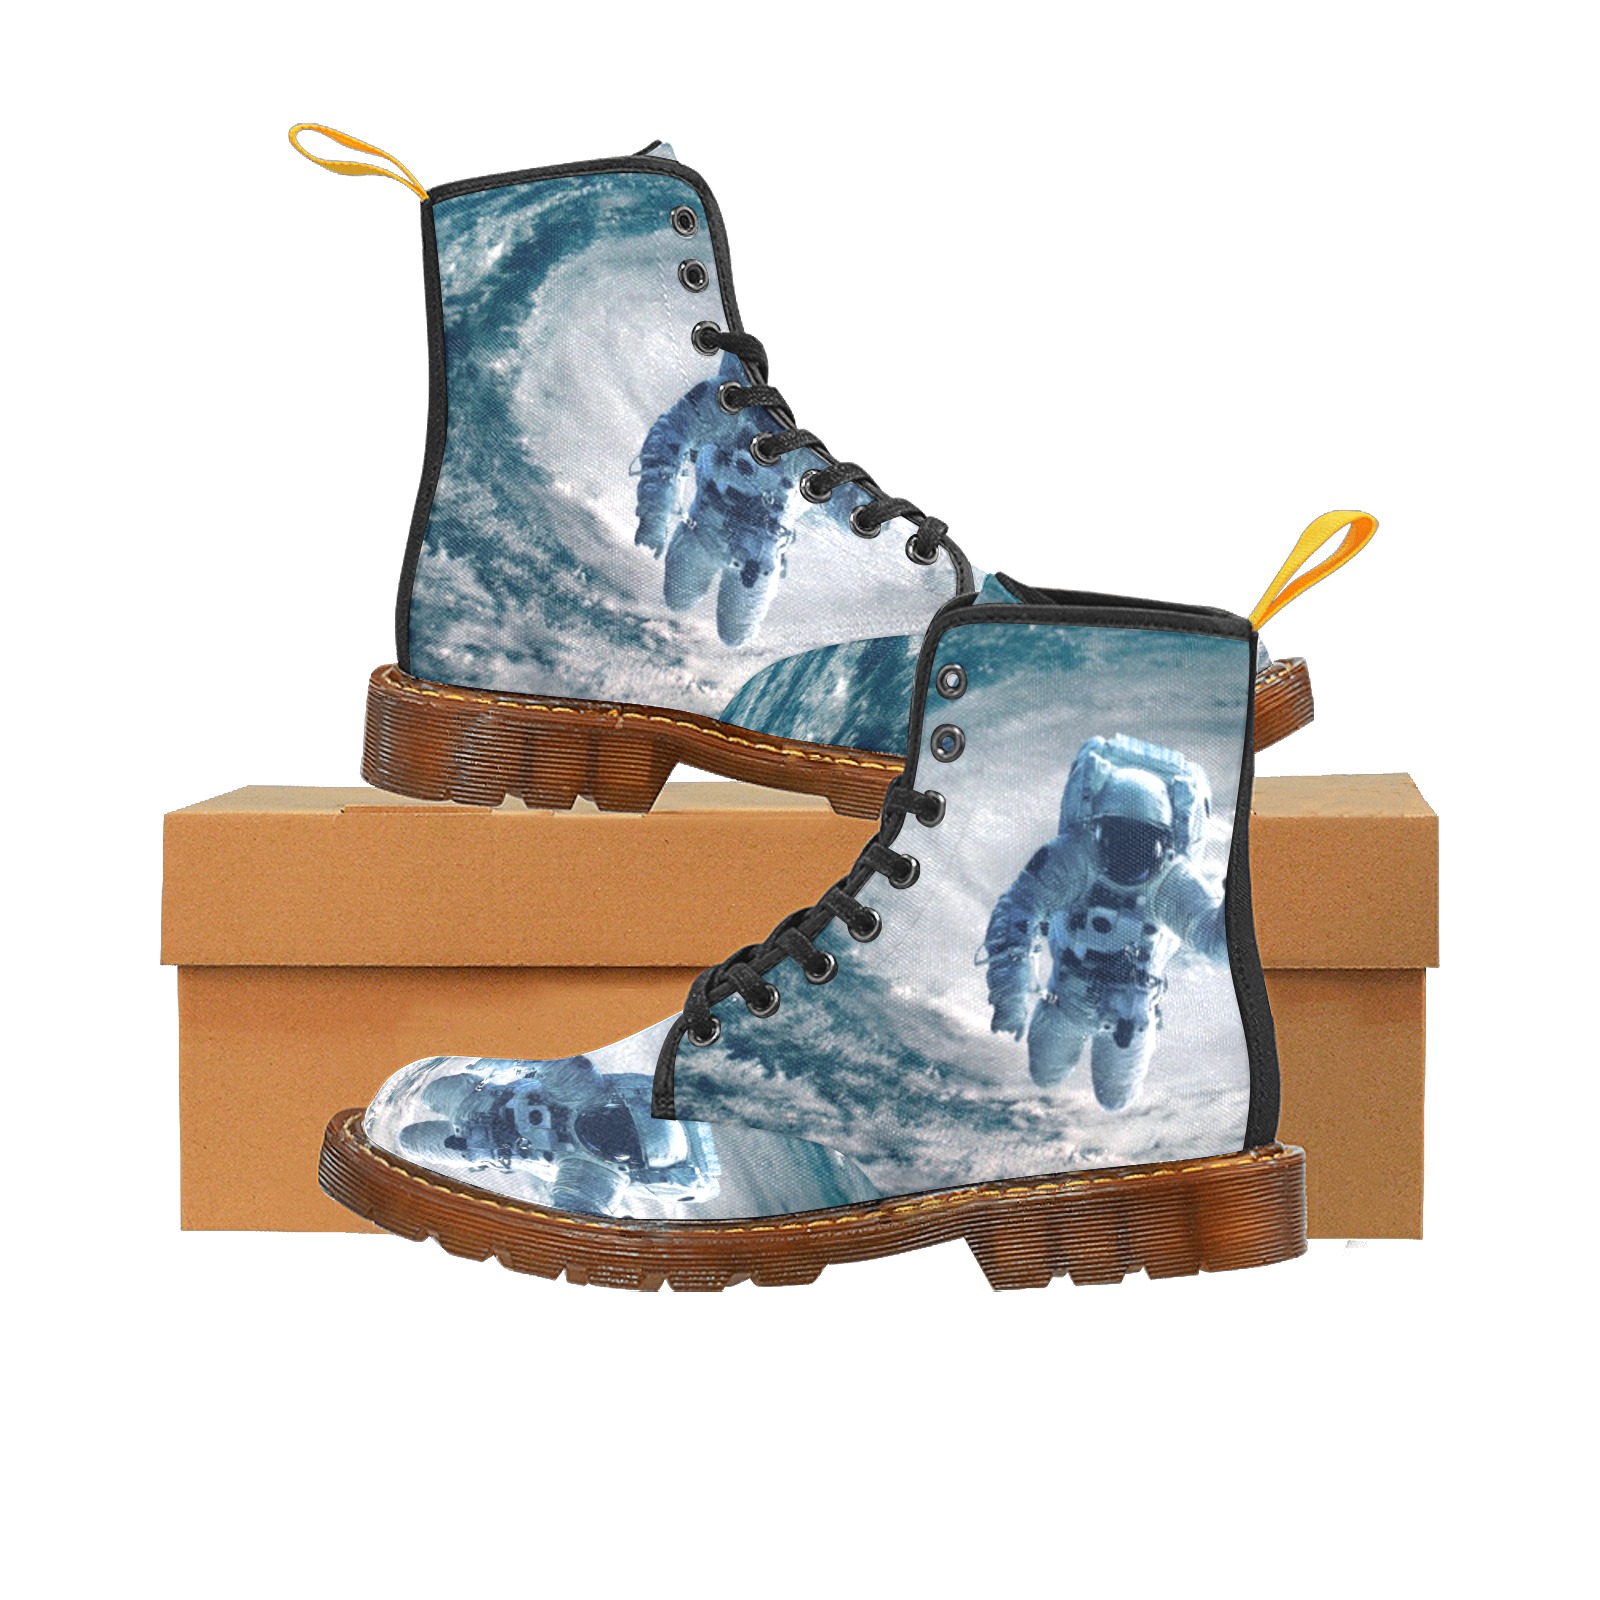 CLOUDS 5 ASTRONAUT Martin Boots For Men Model 1203H